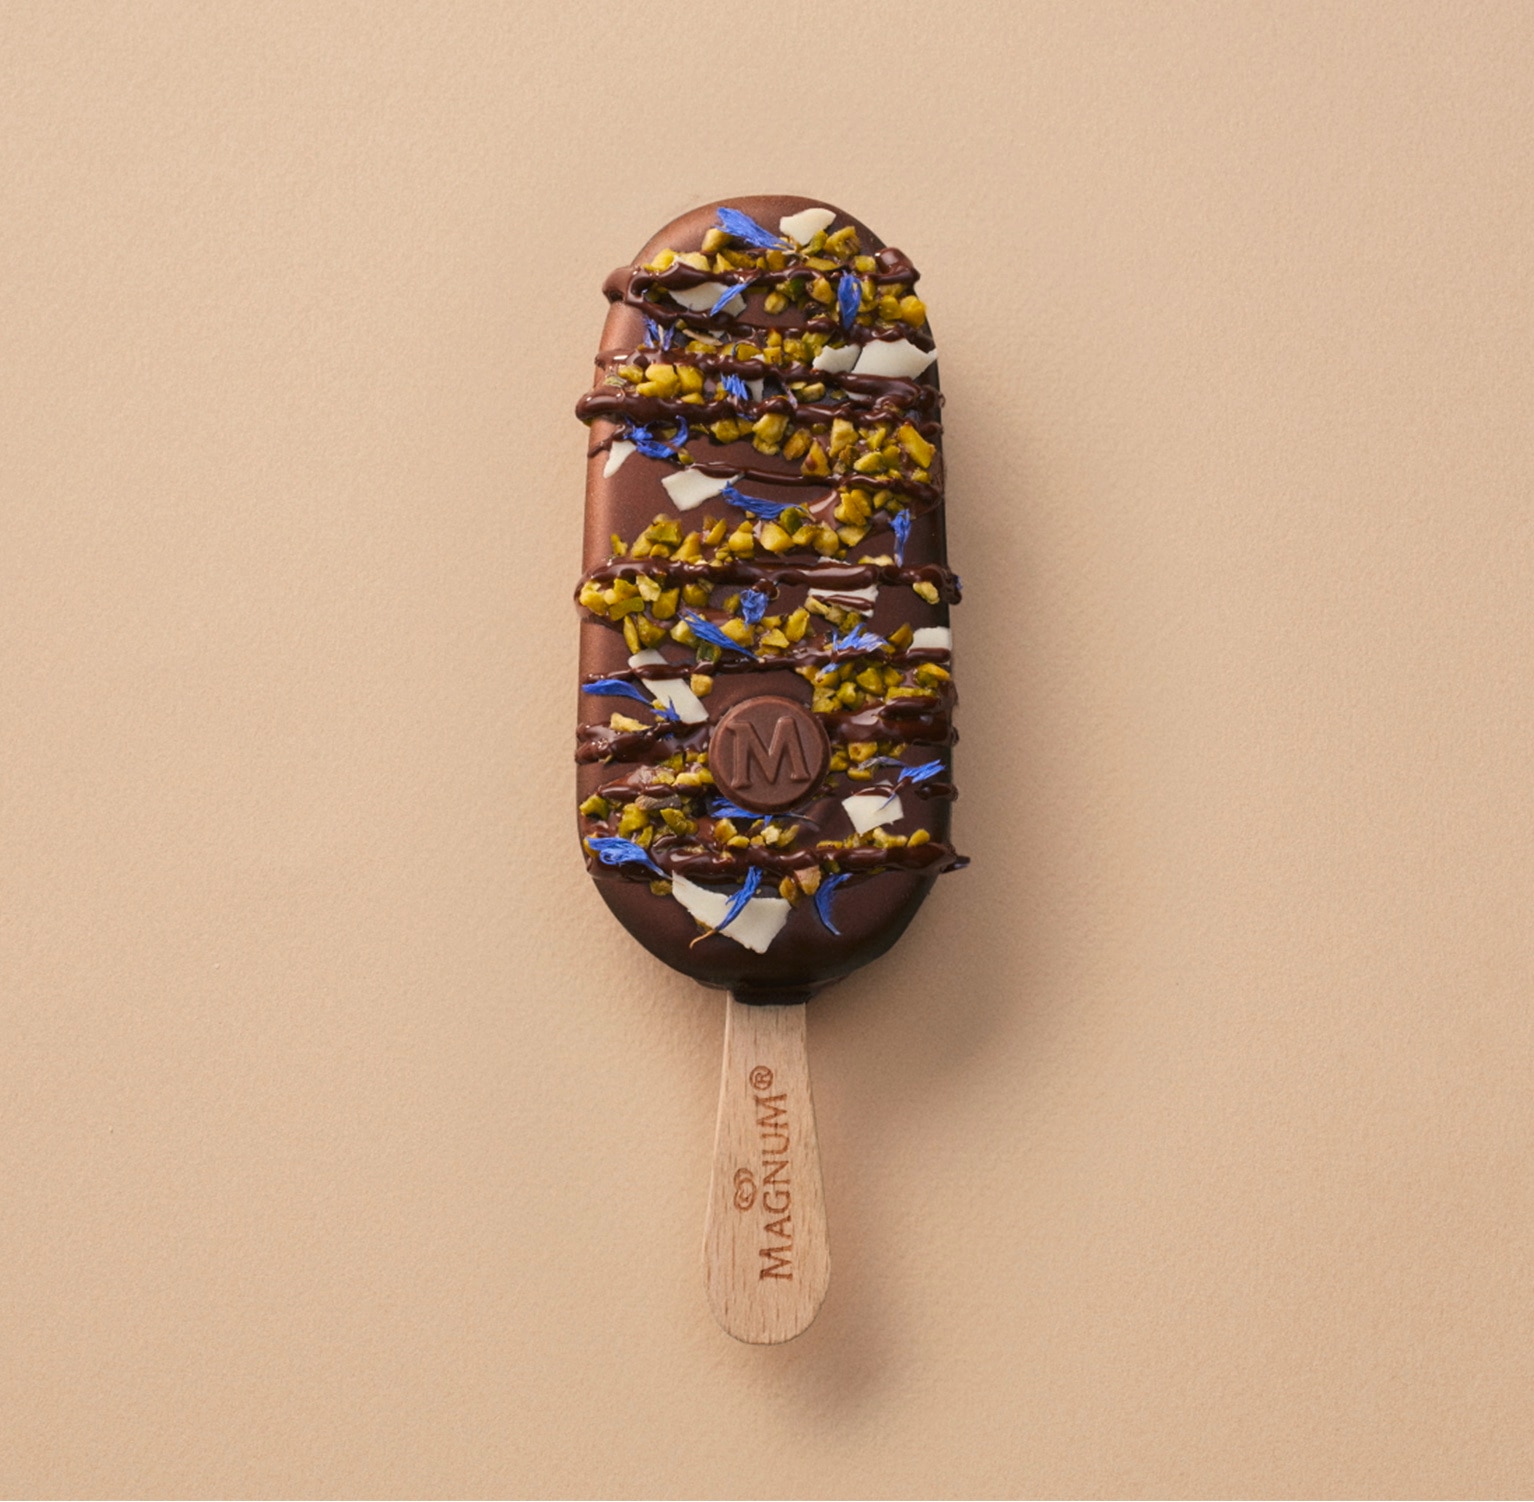 Magnum Classic with rich melted chocolate, pistachio pieces, white chocolate flakes, cornflower and dark chocolate sauce